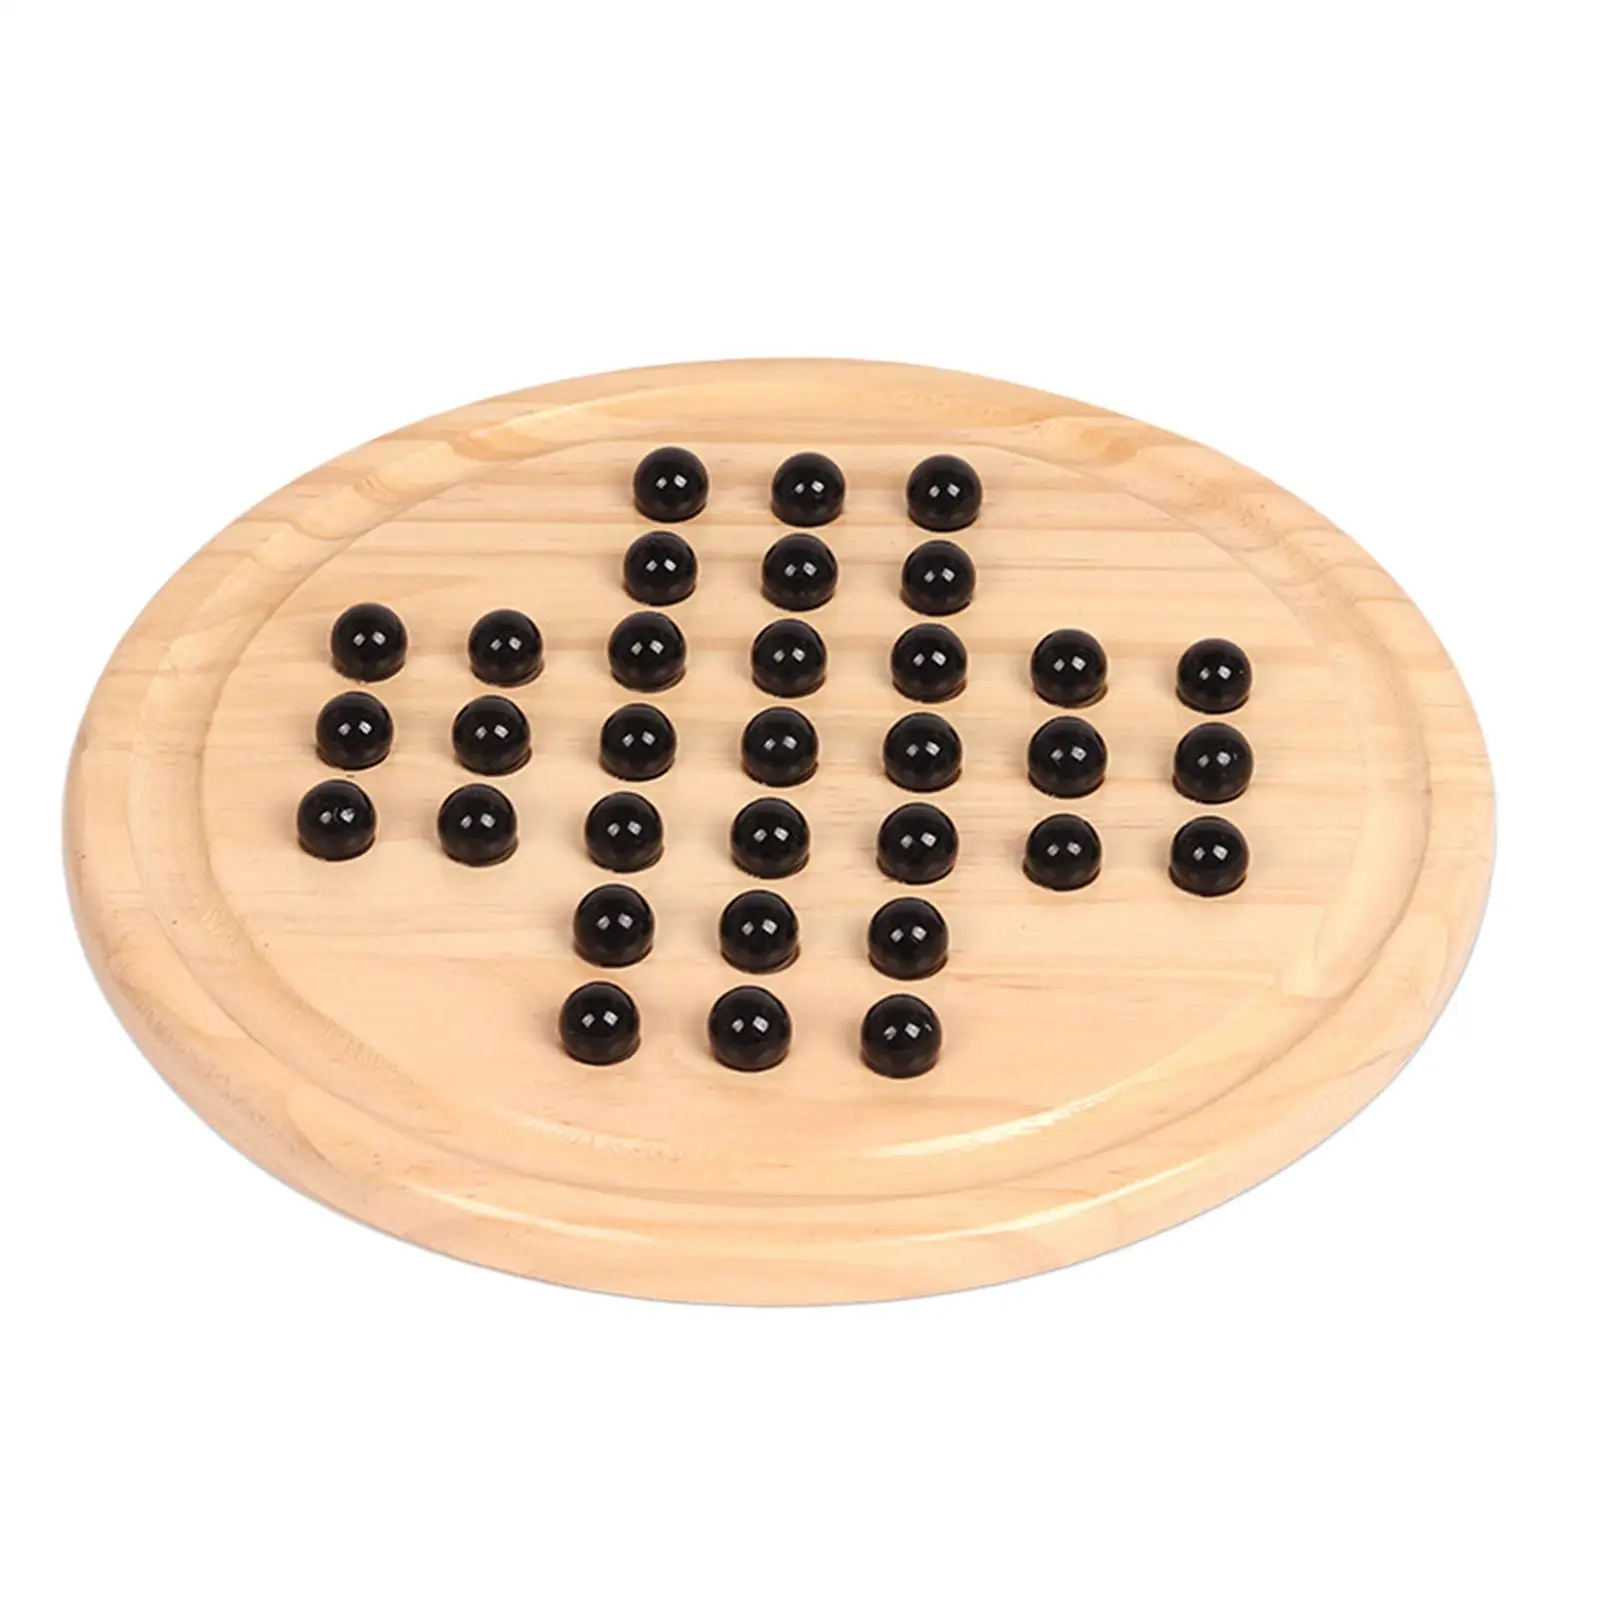 Wooden Peg Board Game With 33 Glass Balls Tabletop Decor For Adults - Puzzles -